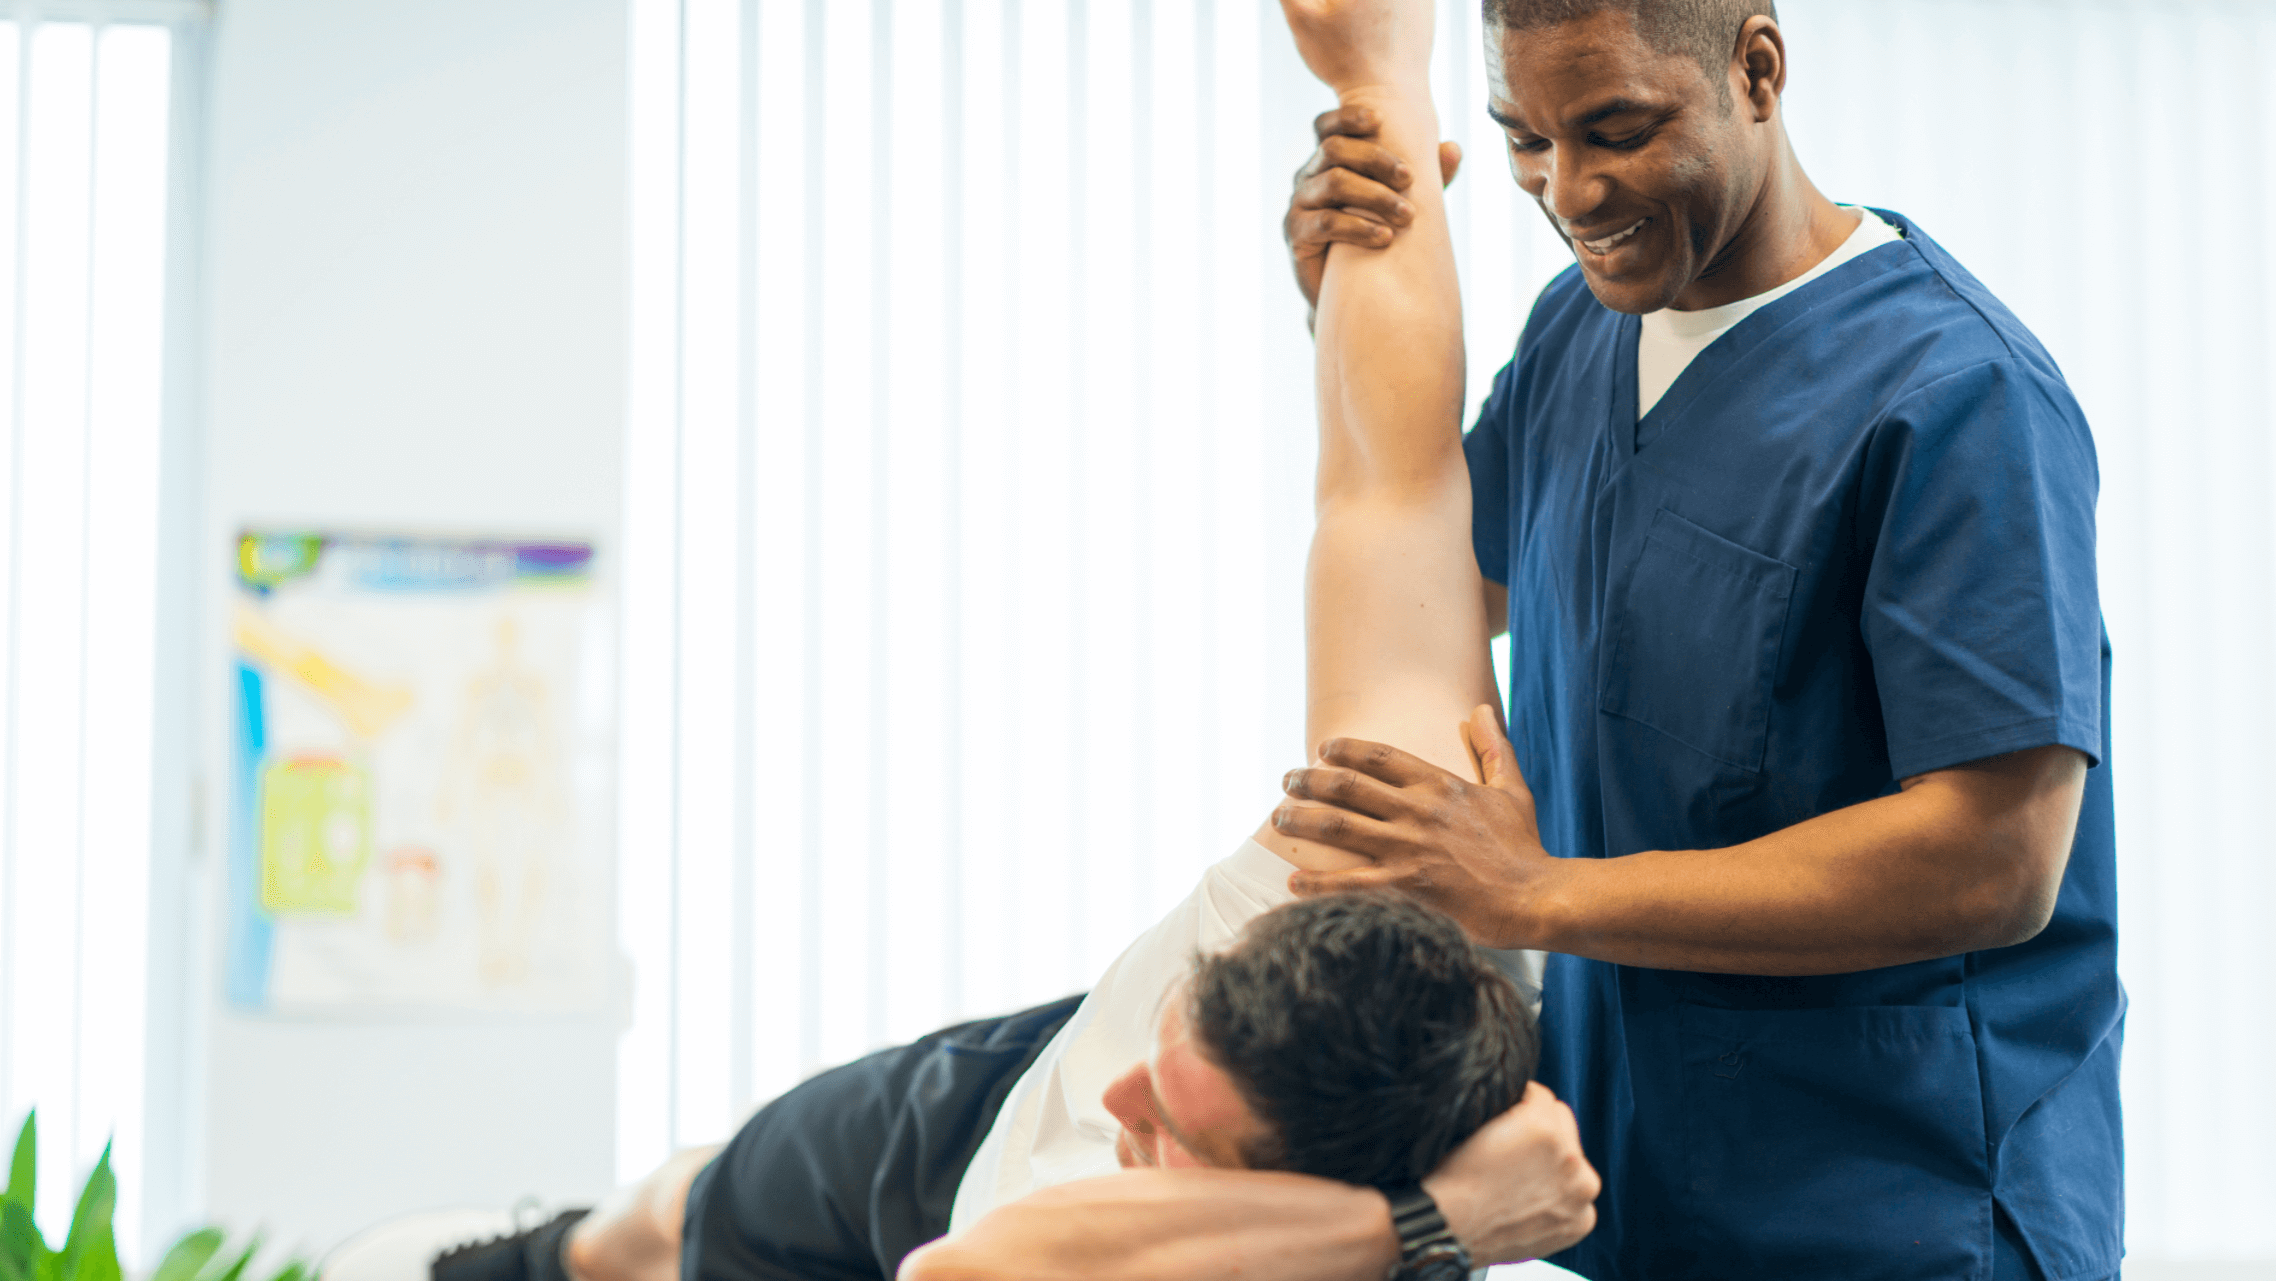 physical therapist near me<br>physical therapy clinic Pocatello<br>Chubbuck physical therapist<br>Pocatello physical therapy<br>PT near me